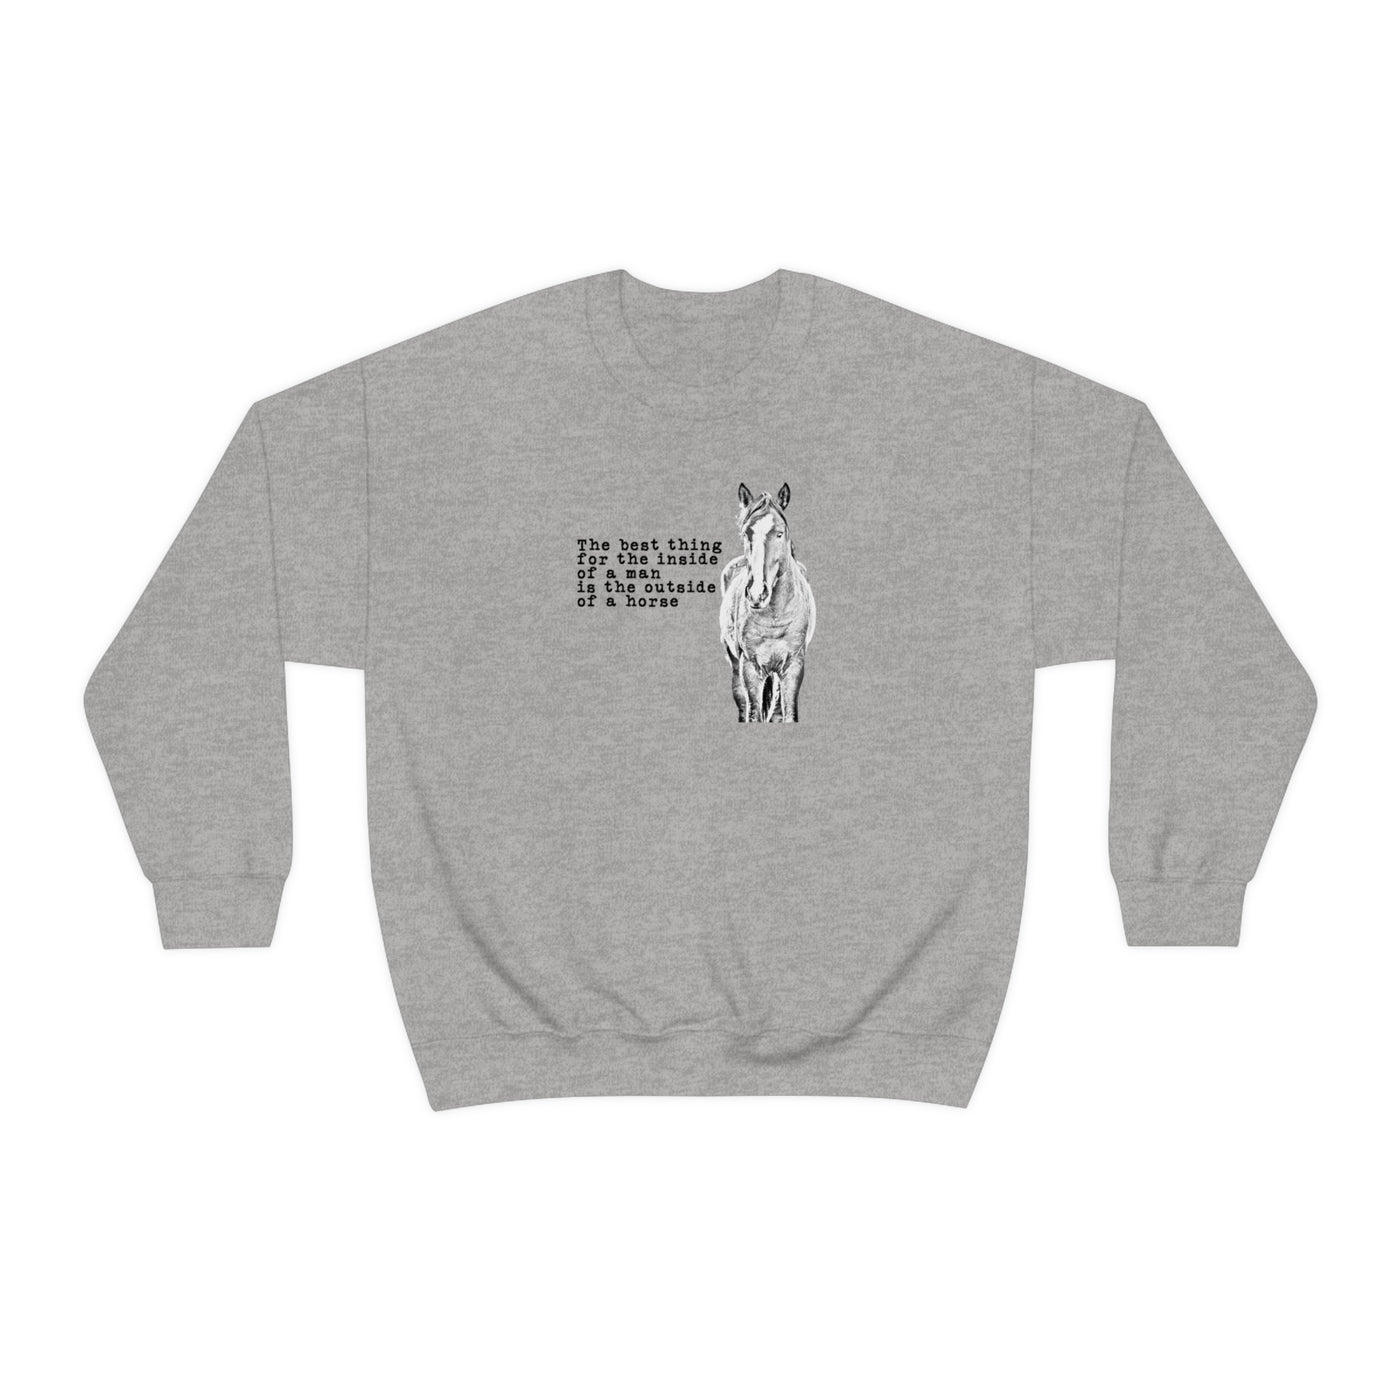 The Best Thing For The Inside Of A Man Is The Outside Of A Horse Crewneck Sweatshirt